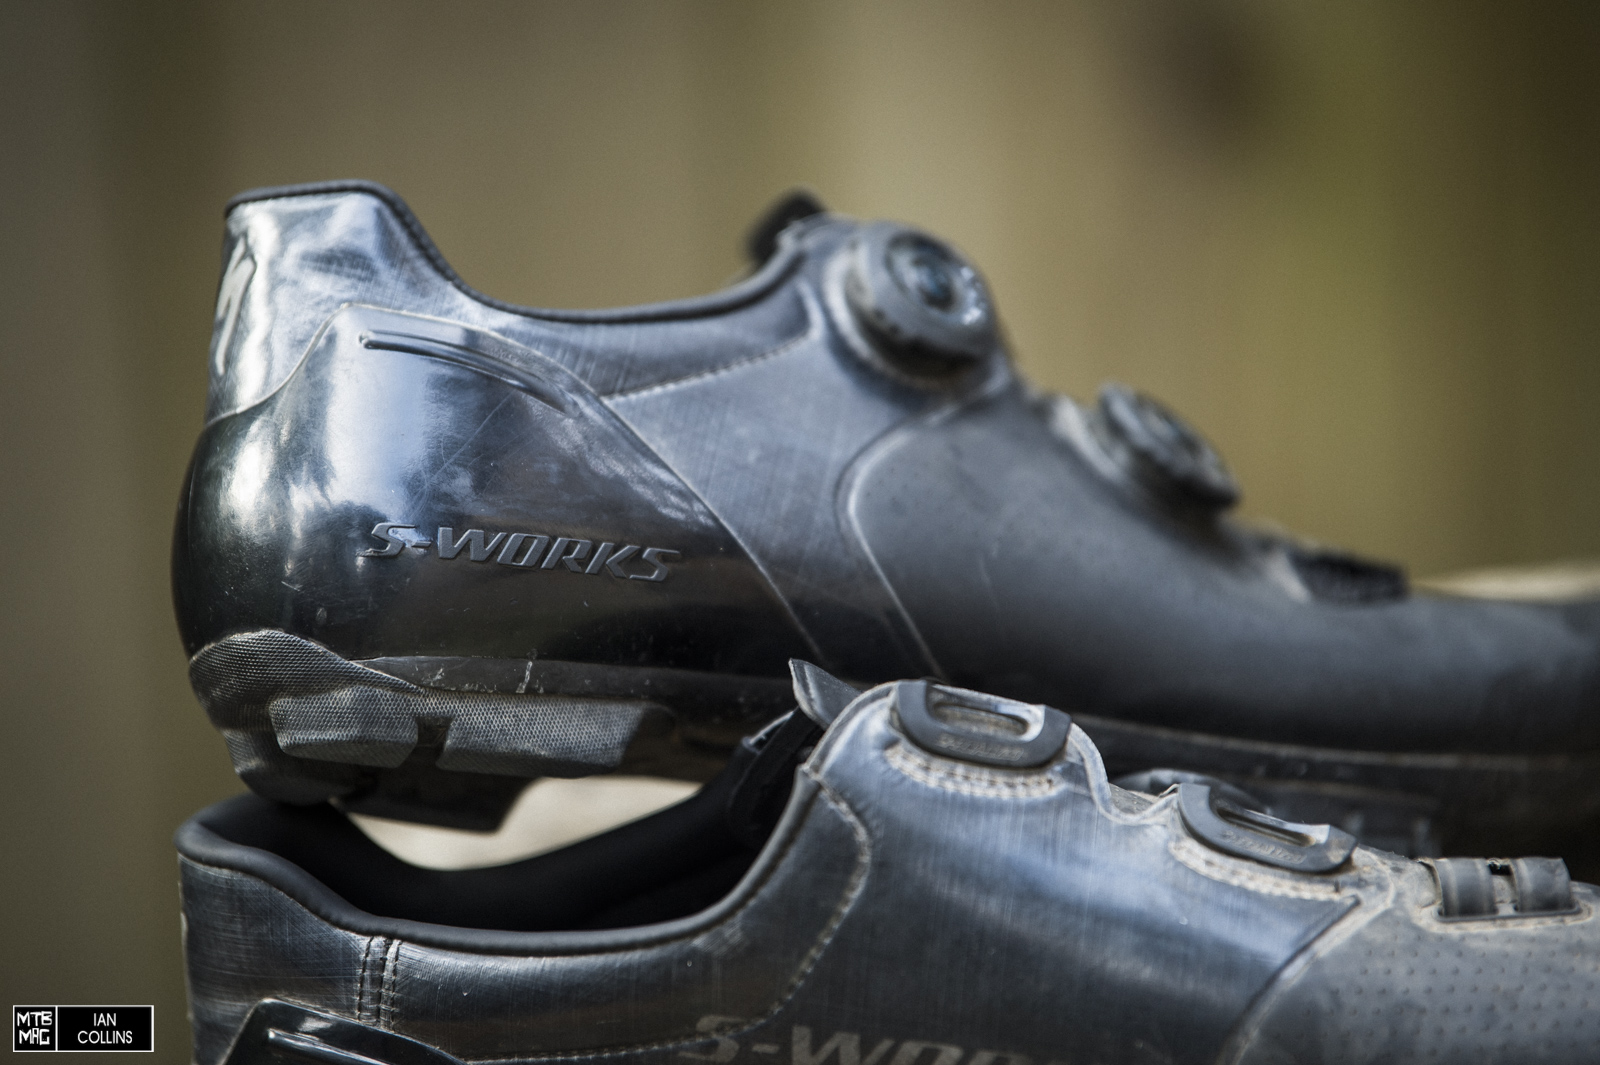 Tested] Specialized S-Works 6 XC Shoes